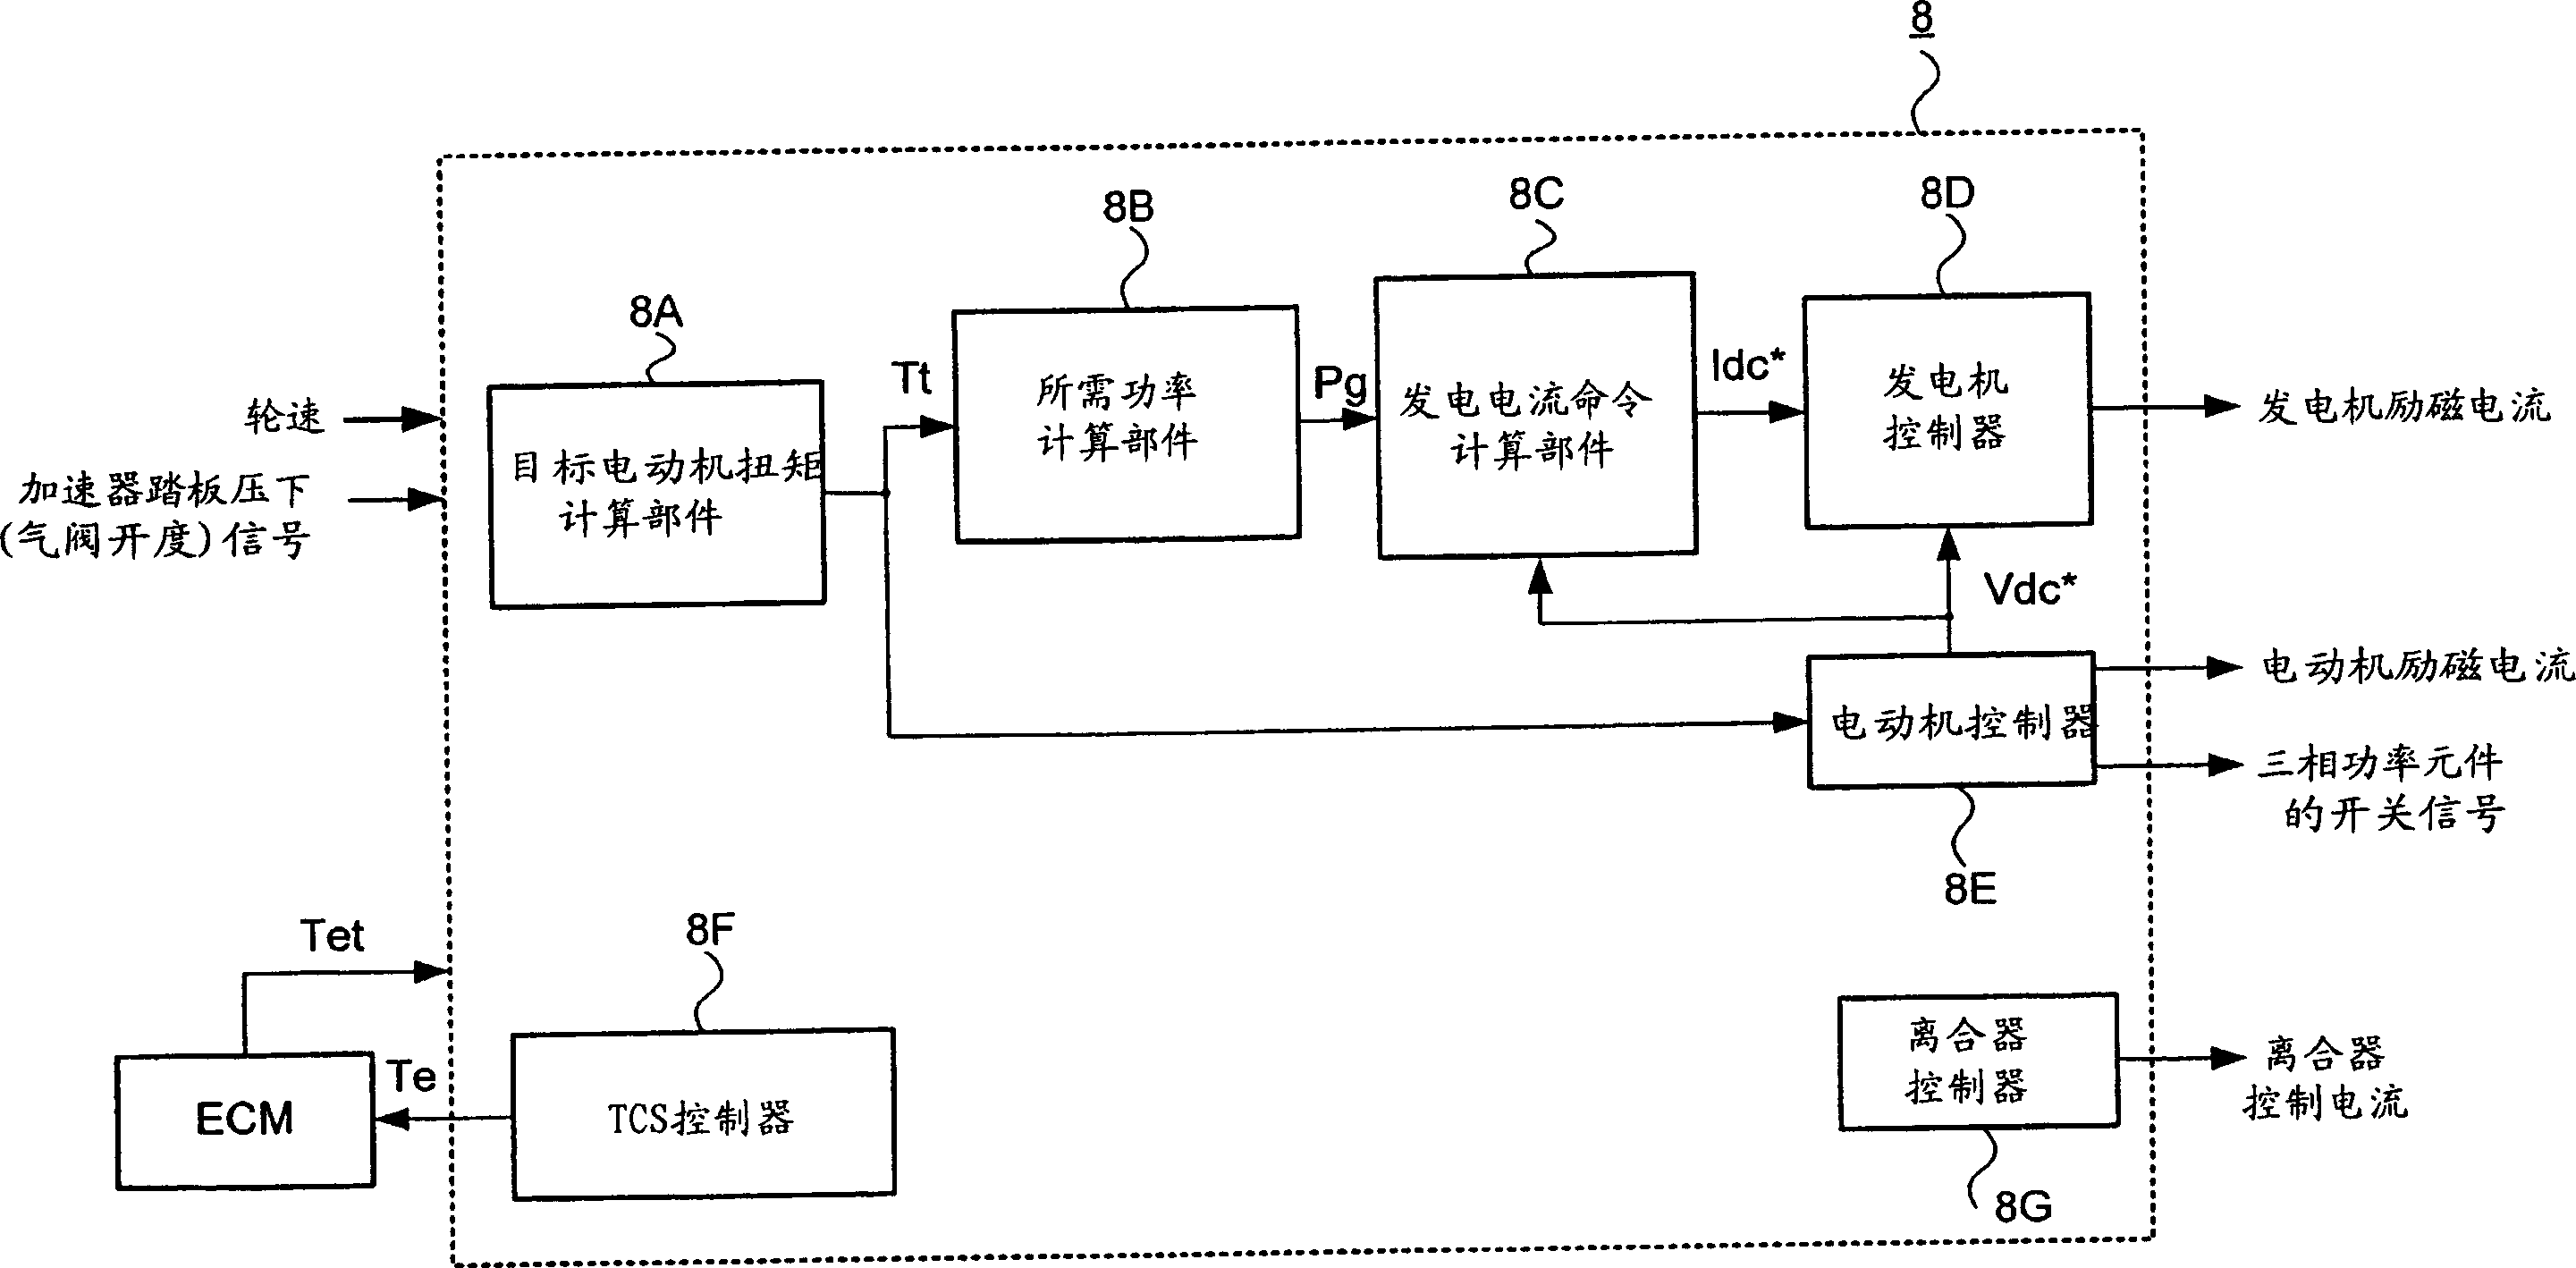 Generated power control system